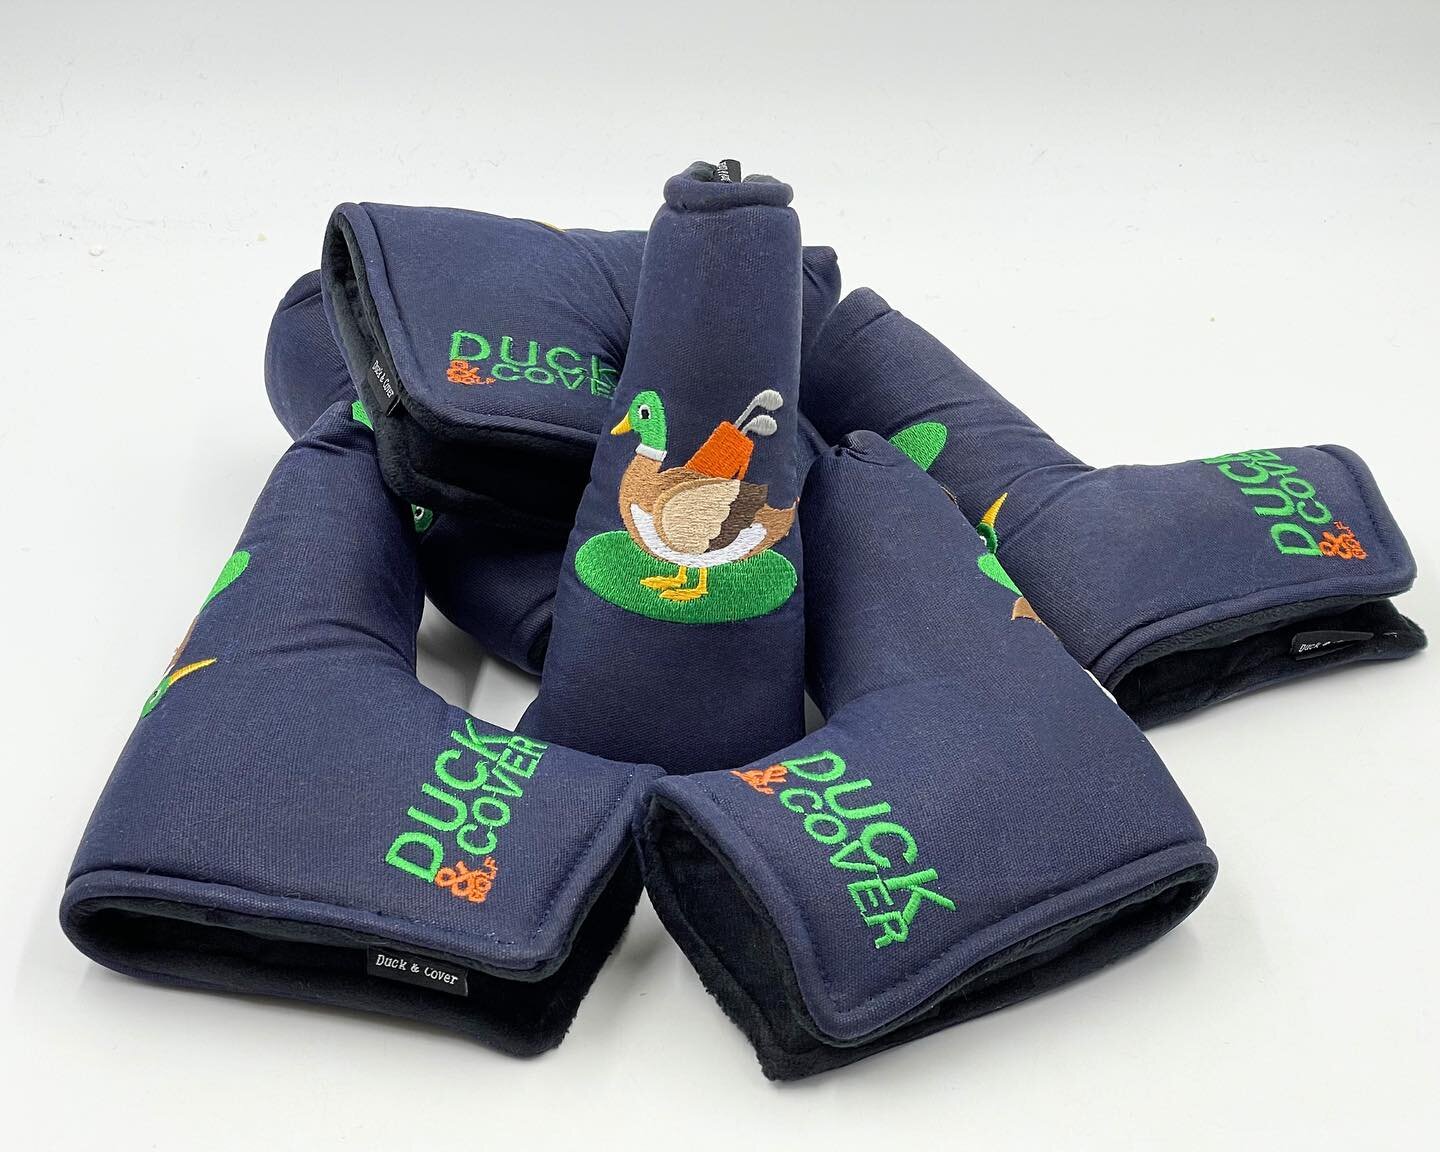 Introducing our new waxed canvas blade putter covers. Made from high quality materials, these headcovers will stand up to the conditions while still looking amazing.
🦆🦆🦆
.
.
.
.
#headcover #headcovers #sherpaheadcovers #sherpa #golf #golfaccessori